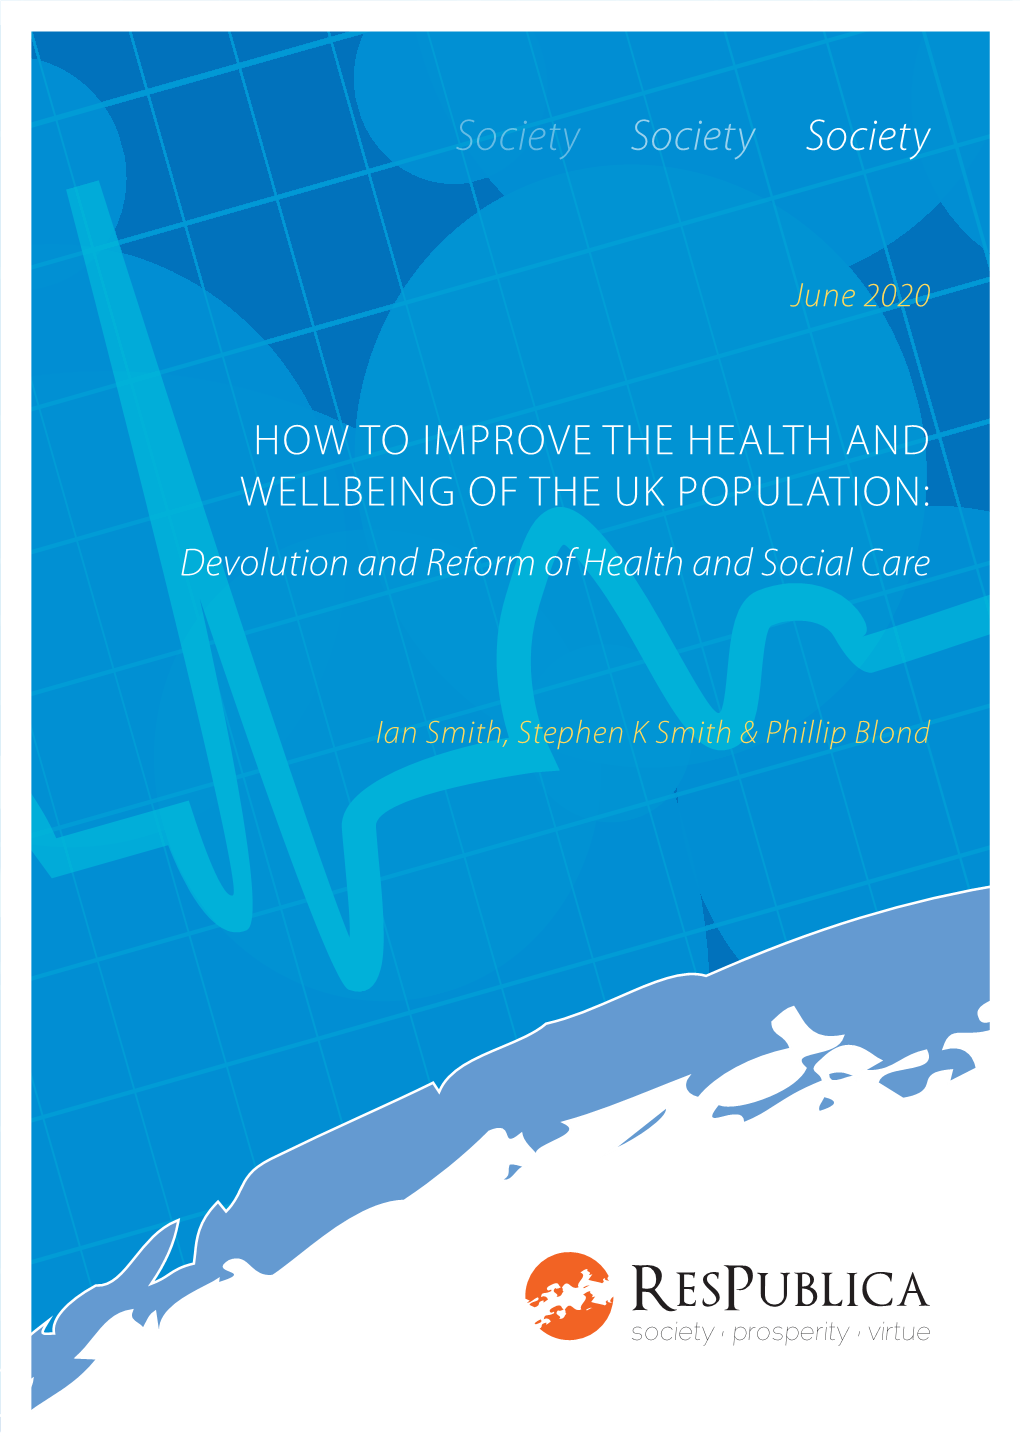 Devolution and Reform of Health and Social Care